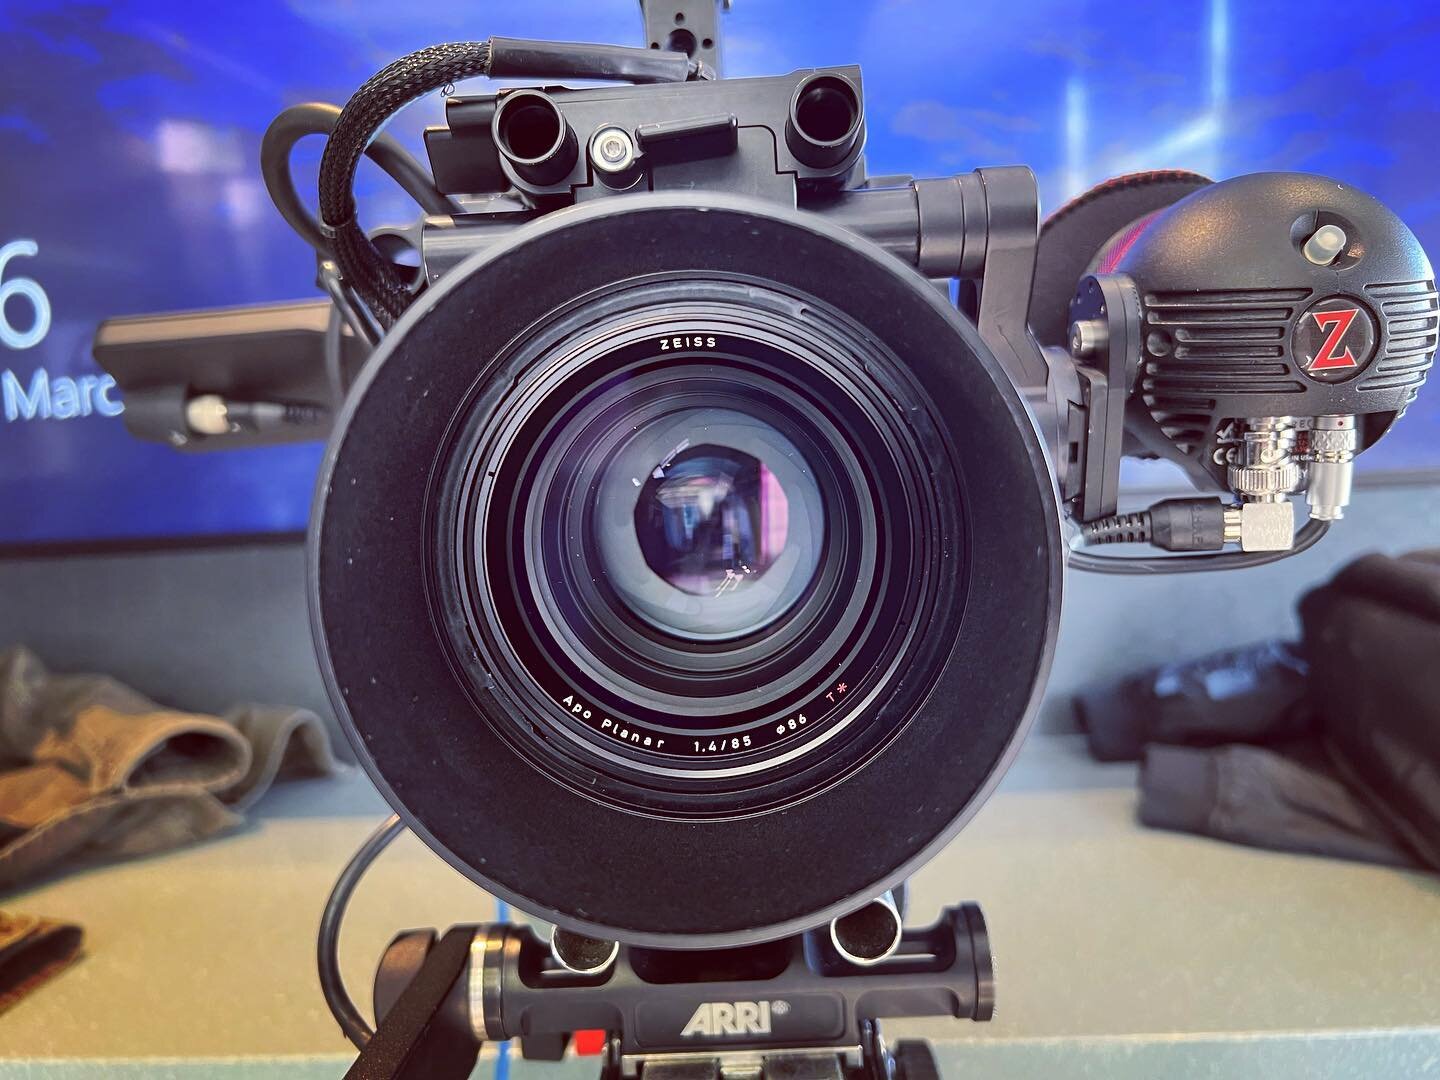 New lens, who dis?

#amidoingthisright #iamnotdoingthisright #videoproductioncompany #videoproduction #videoshoot #marketingvideo #marketing #videoproductionla #corporatevideographer #corporatevideo #healthcare #contentprovider #interview #commercial